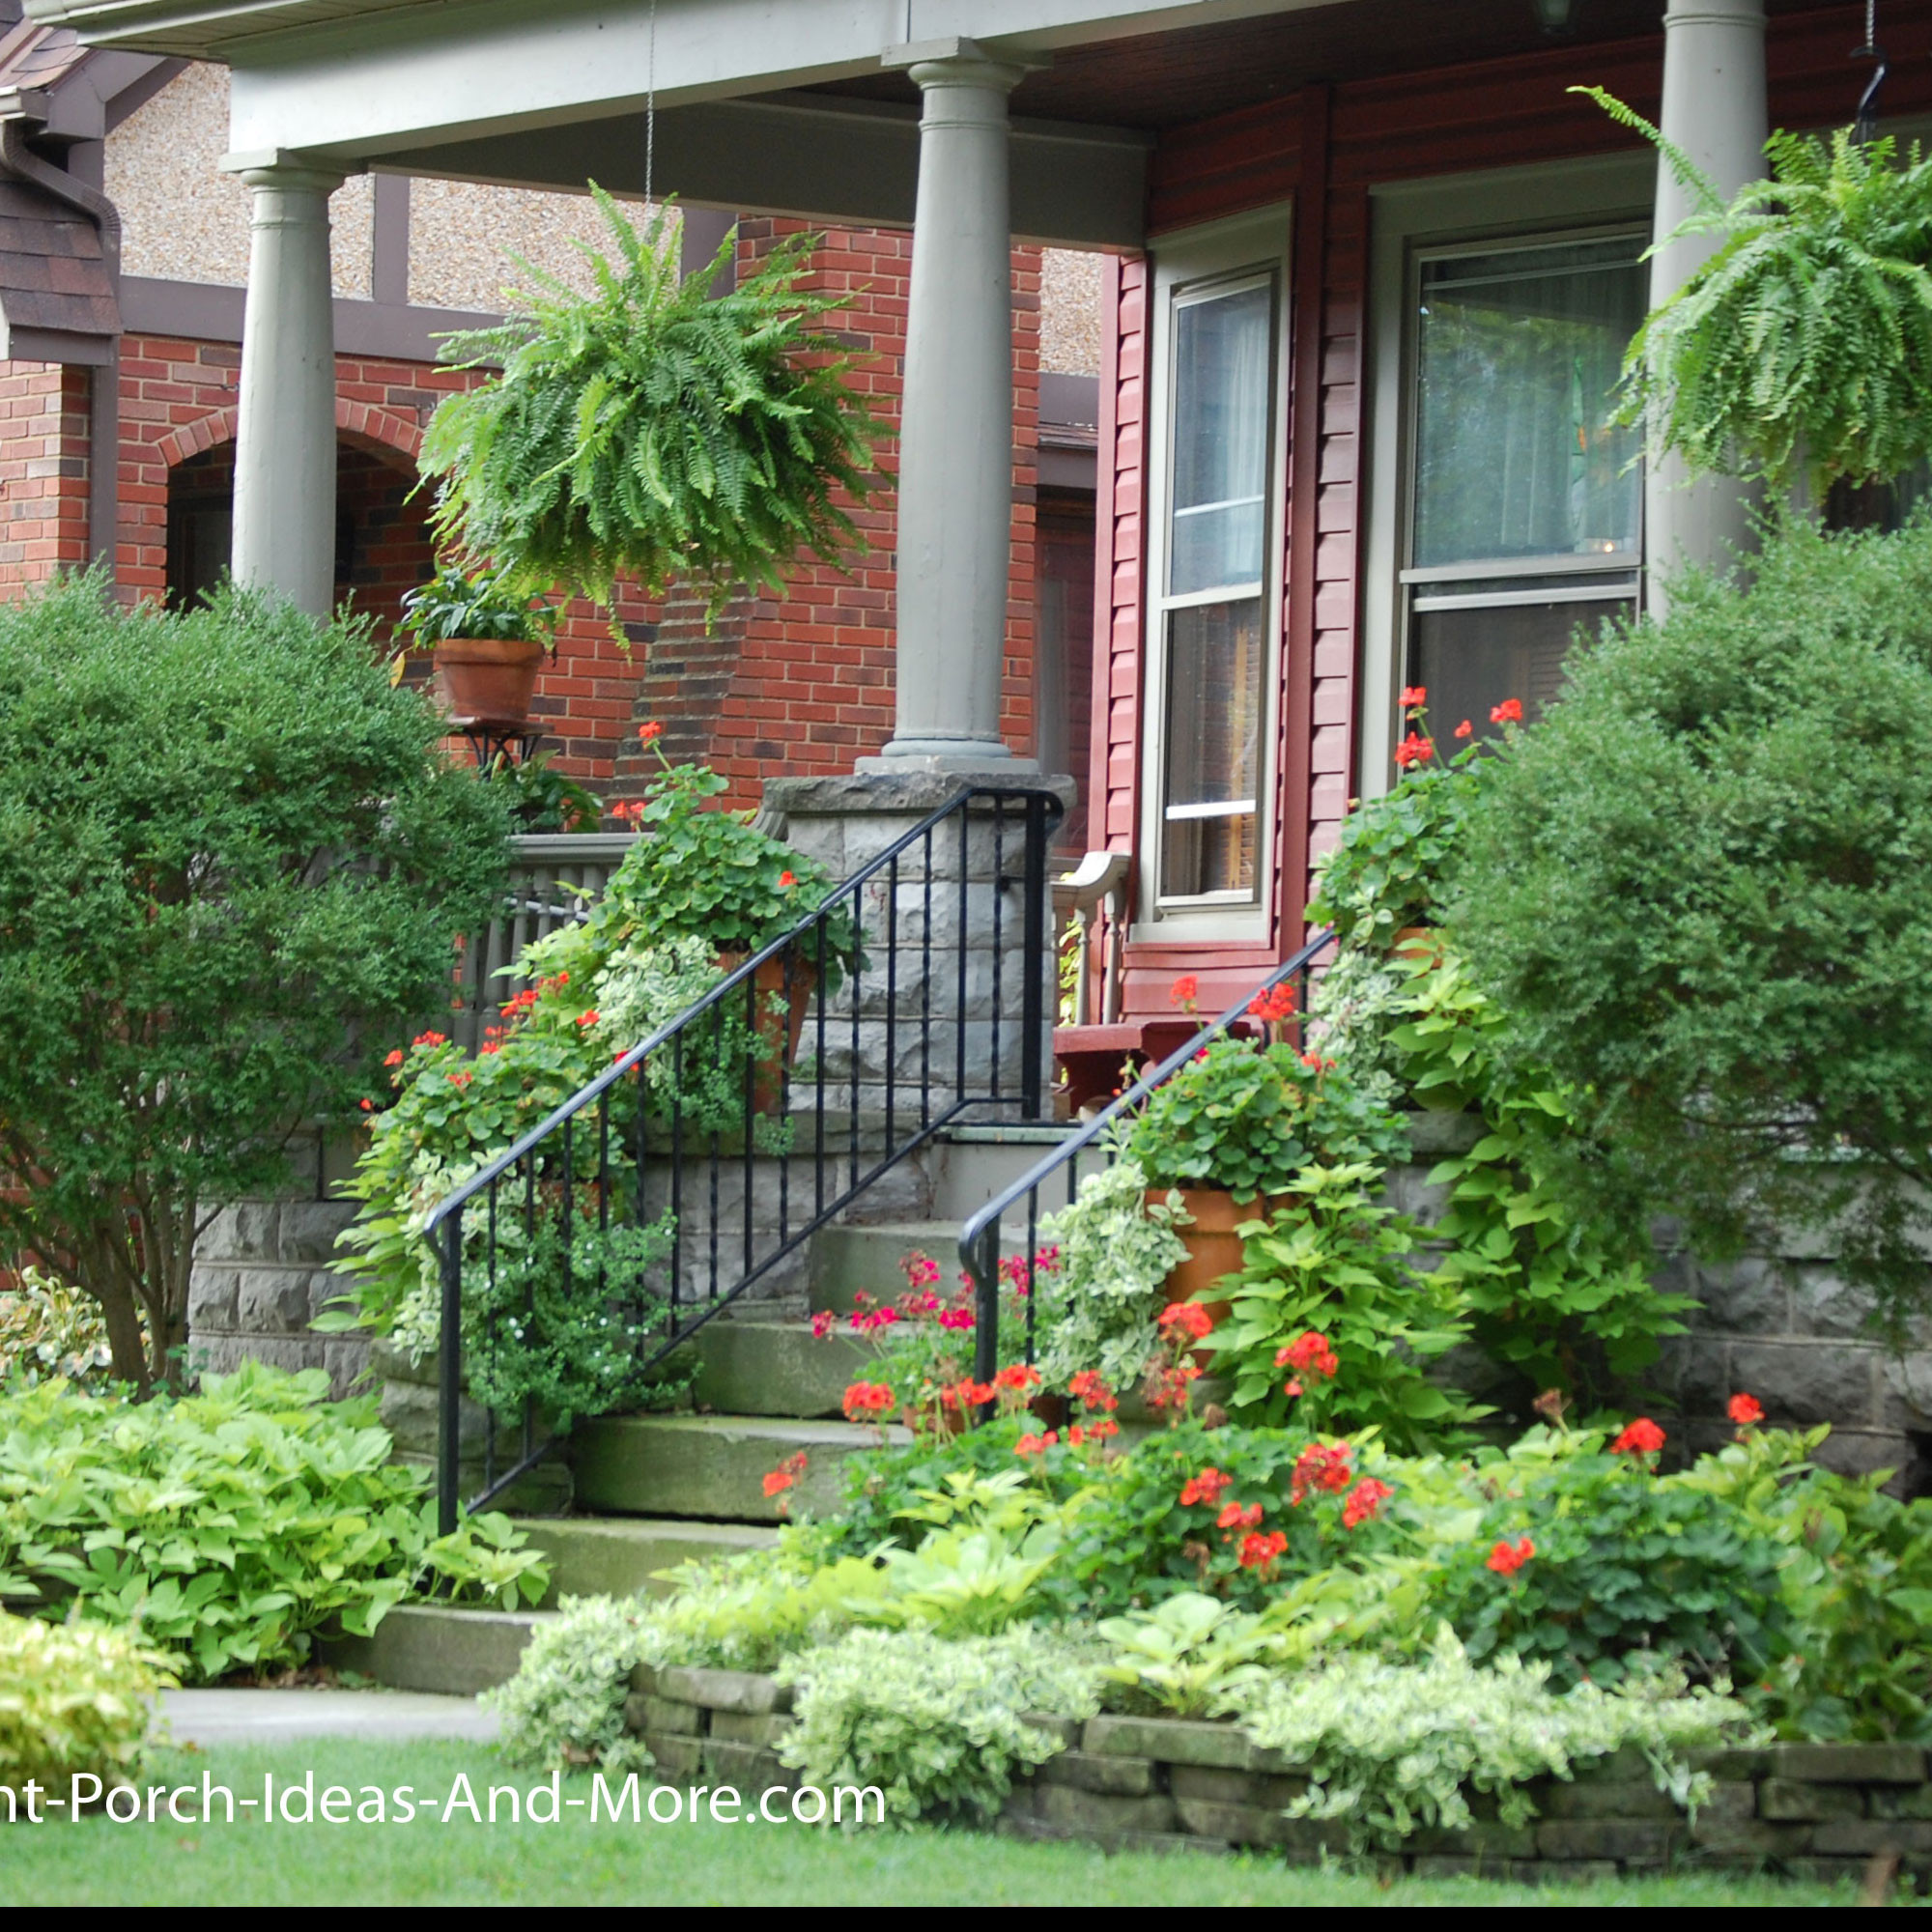 Front Porch Landscape Designs
 Porch Landscaping Ideas for Your Front Yard and More